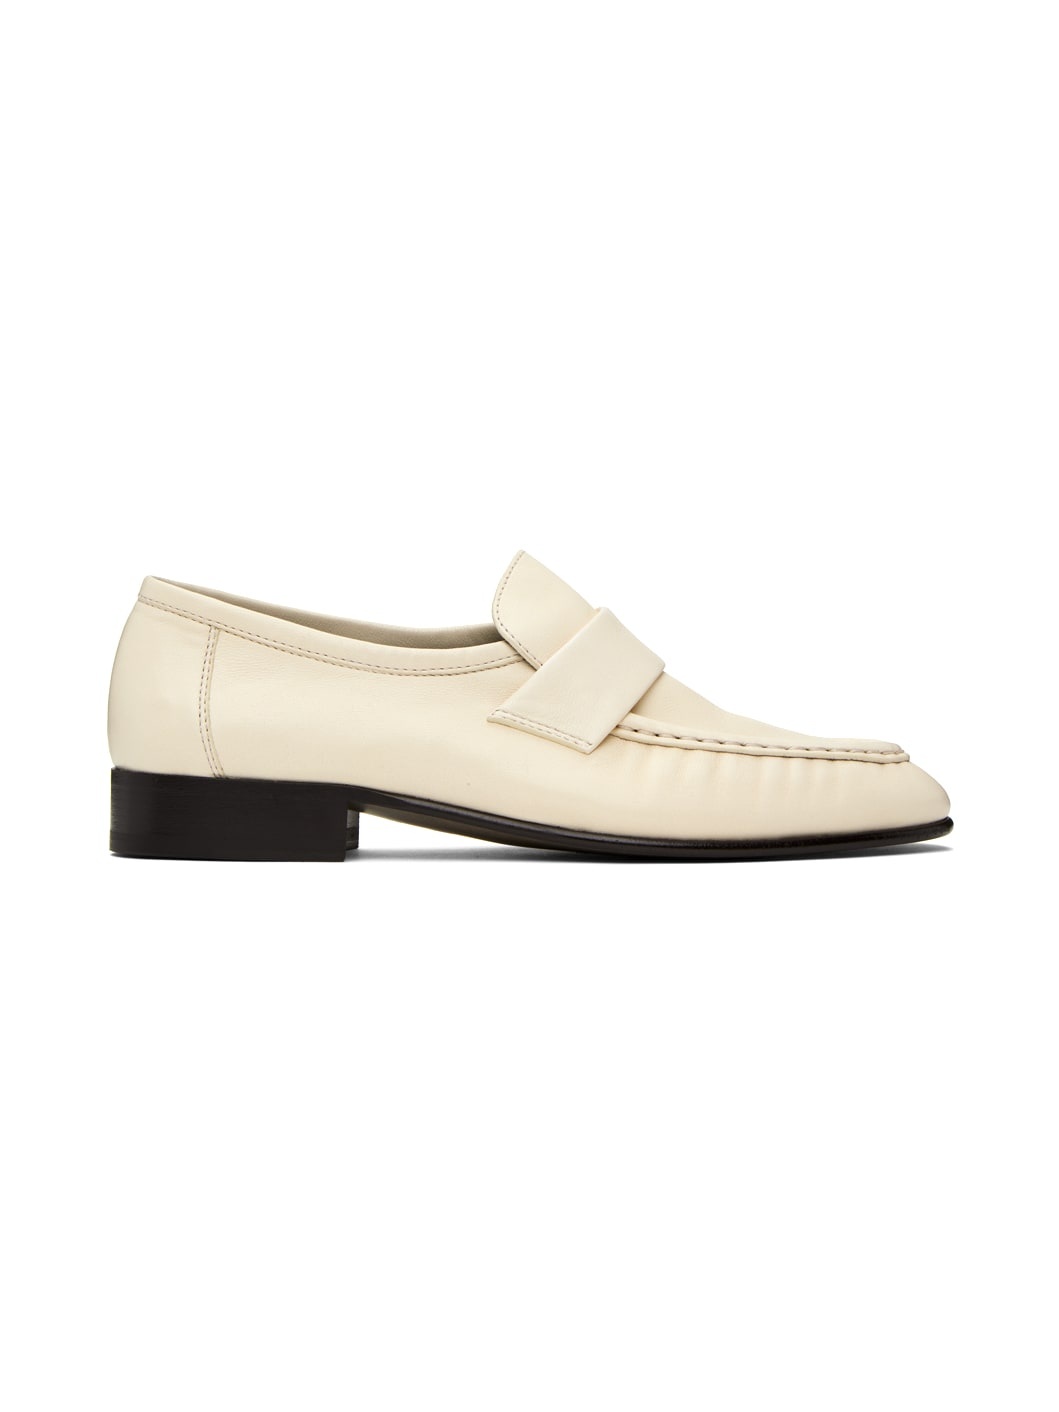 Off-White Soft Loafers - 1